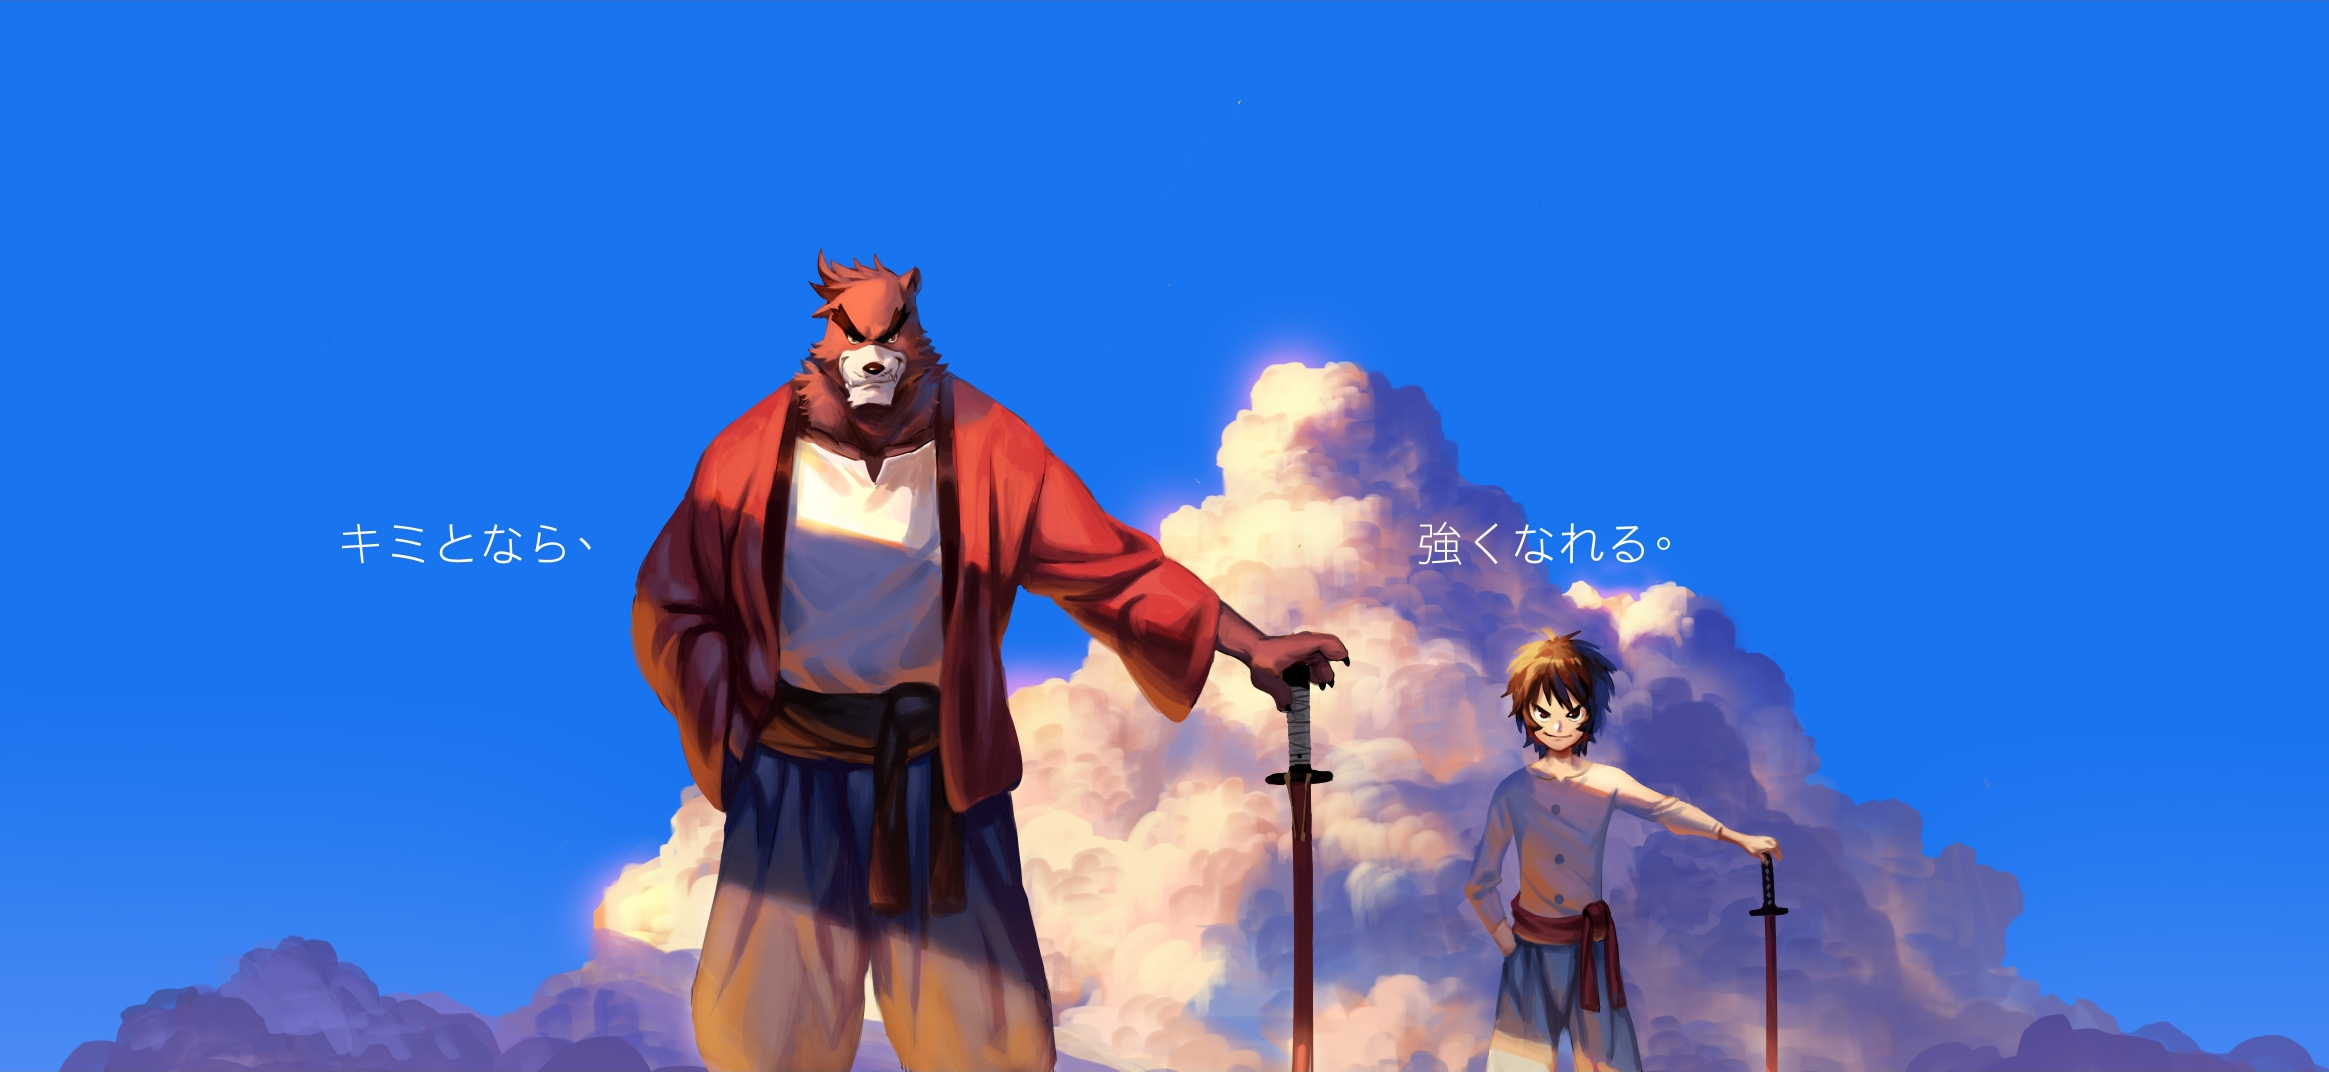 The Boy And The Beast Wallpapers